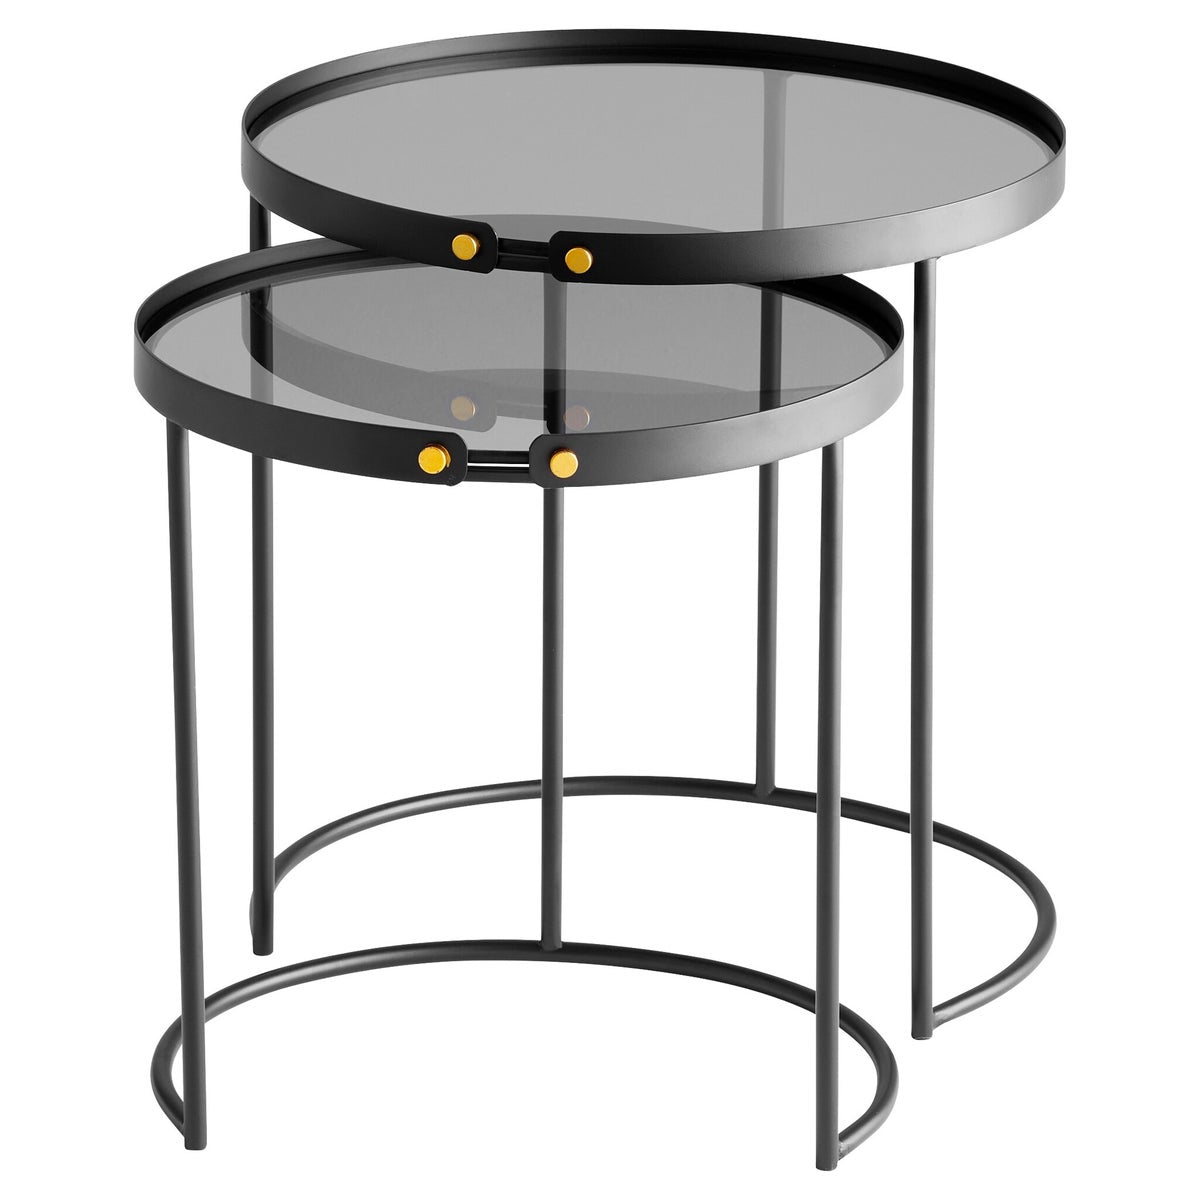 Graphite Flat Bow Tie Tables